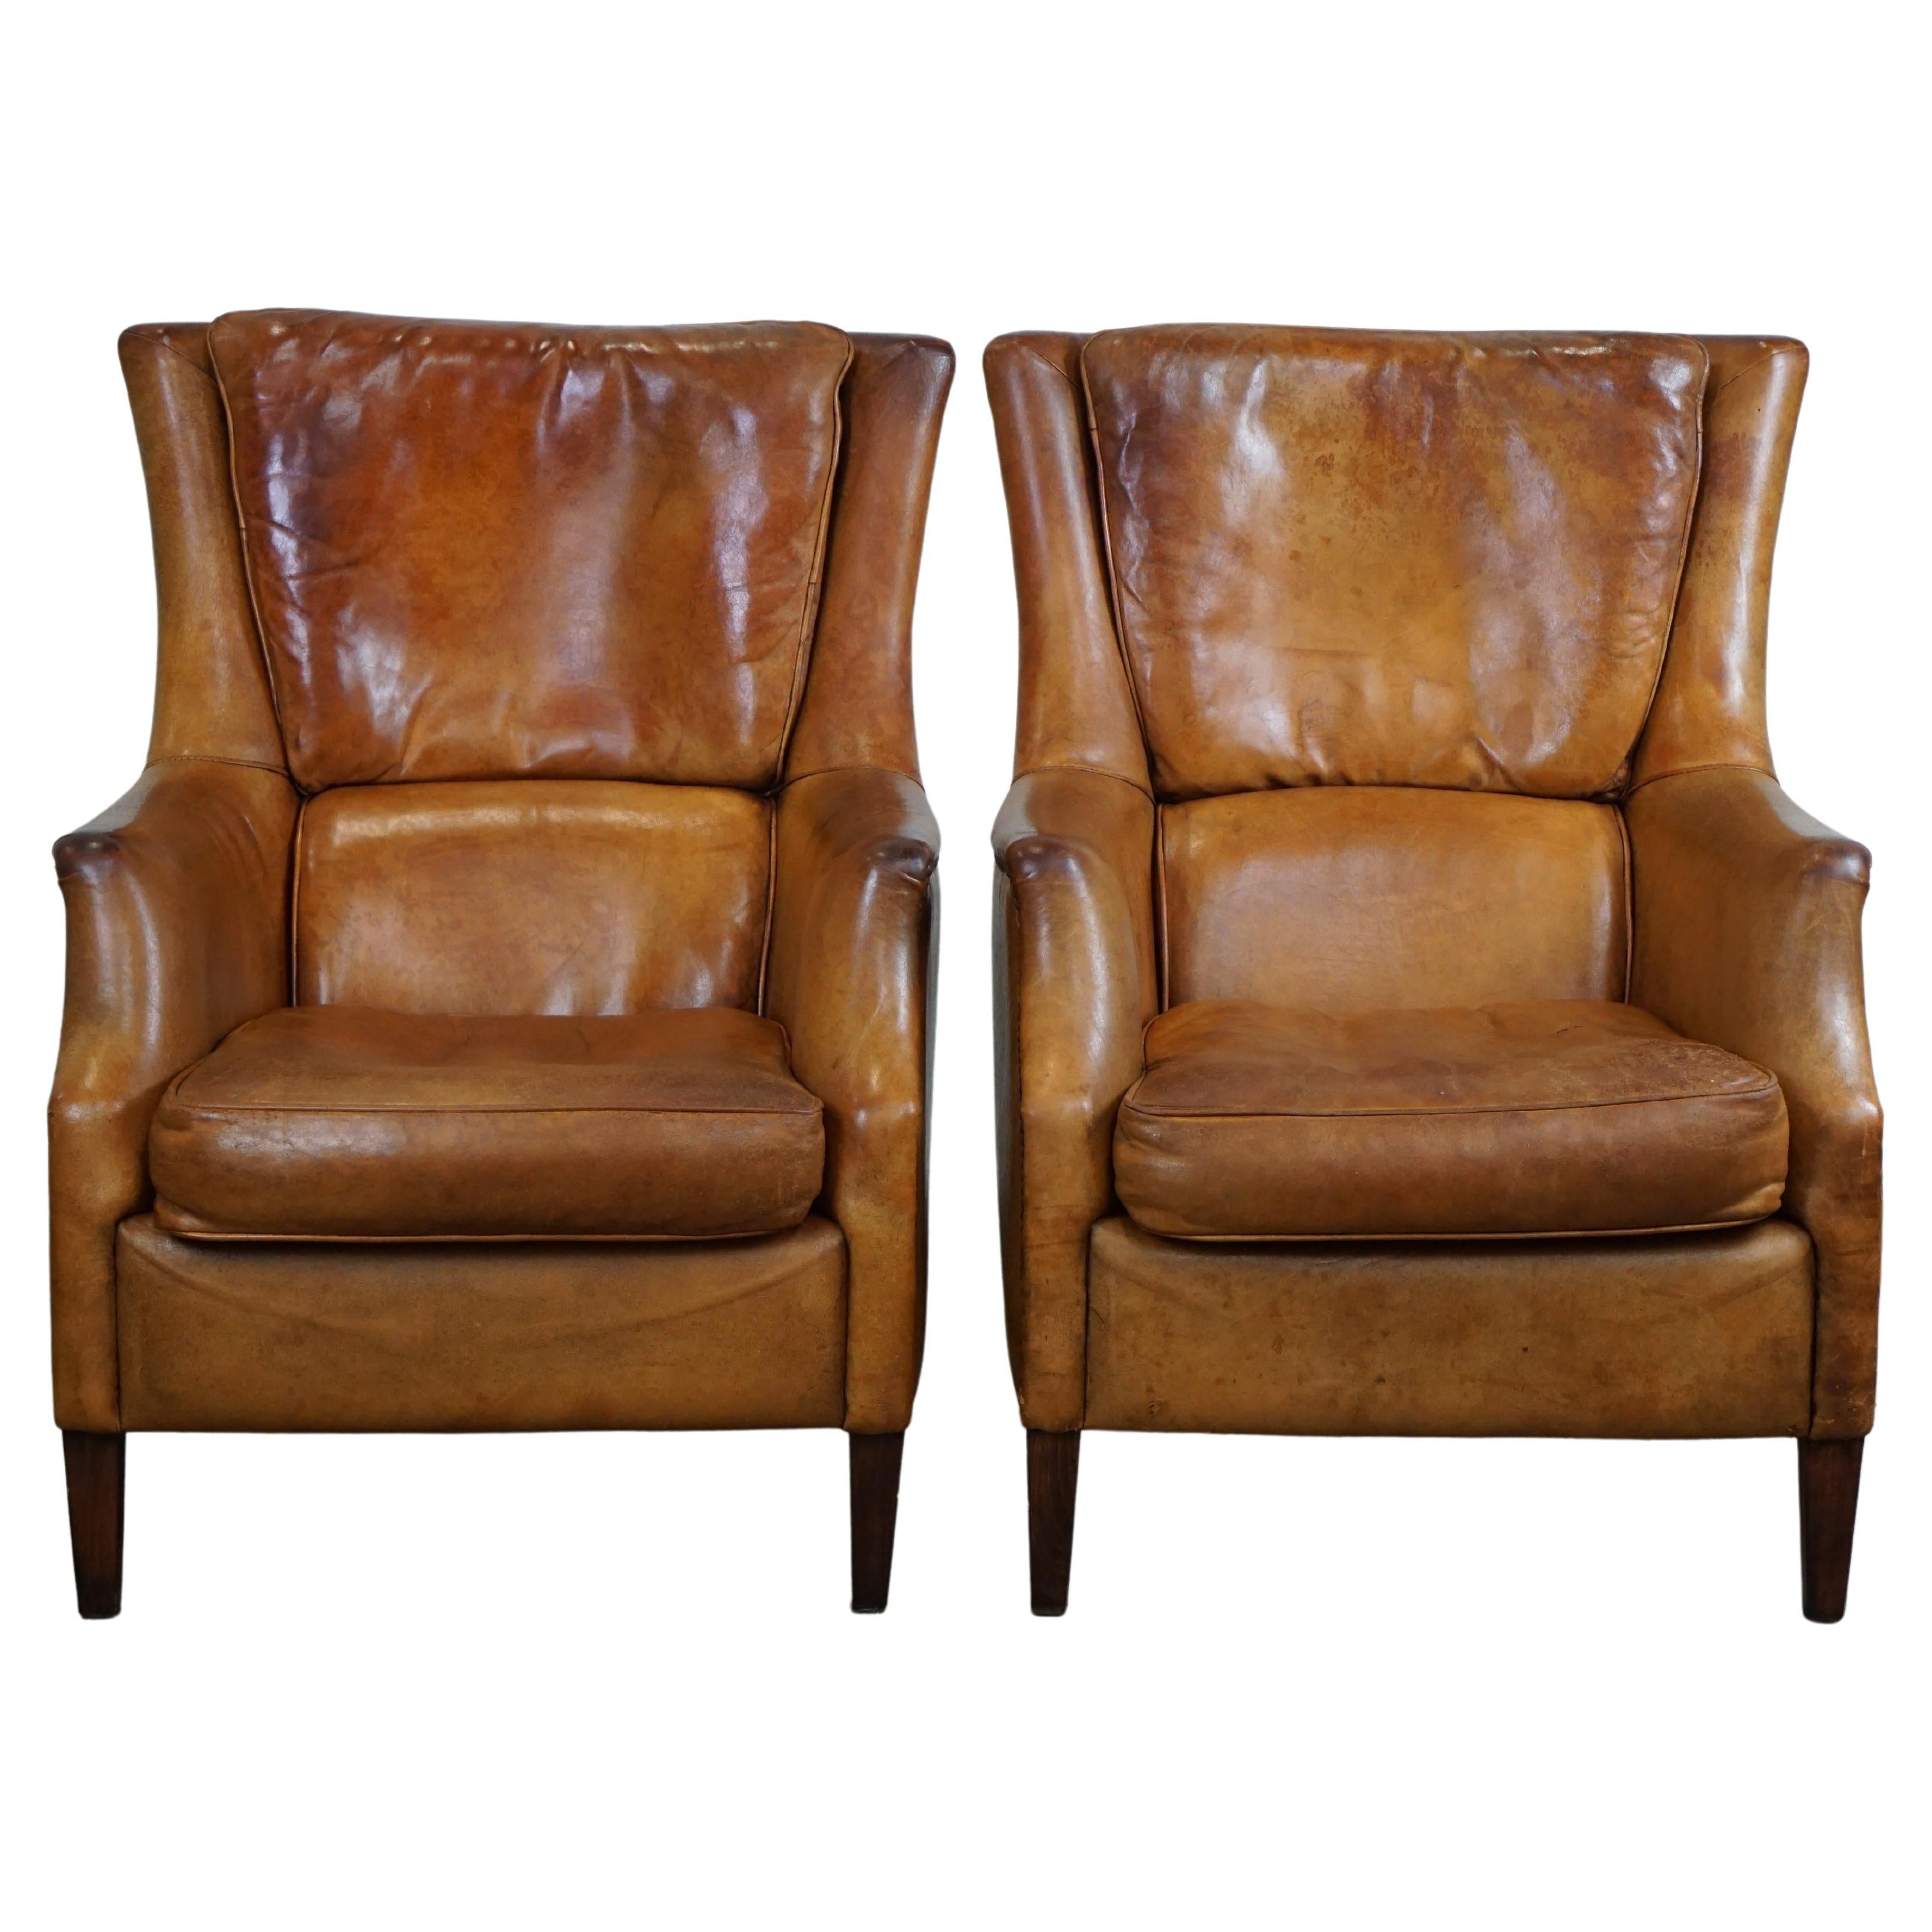 Set of two super rugged and very comfortable sheep leather armchairs.